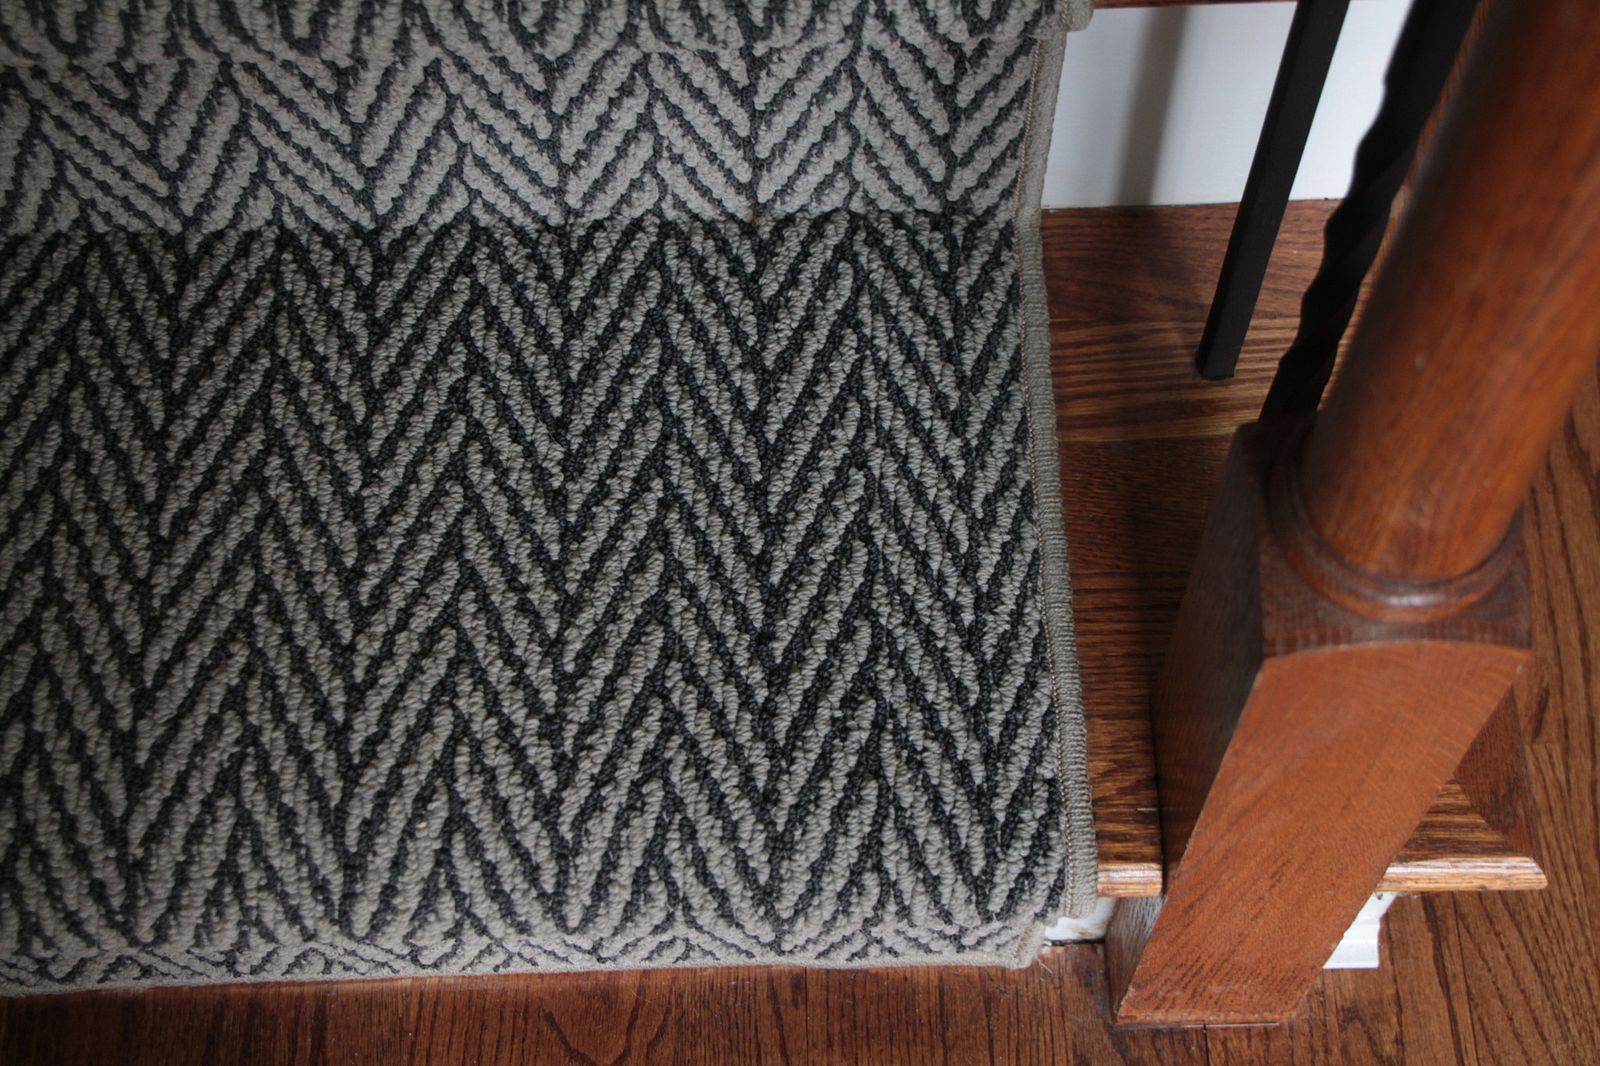 Shaw Floors, Runner Rugs For Stairs